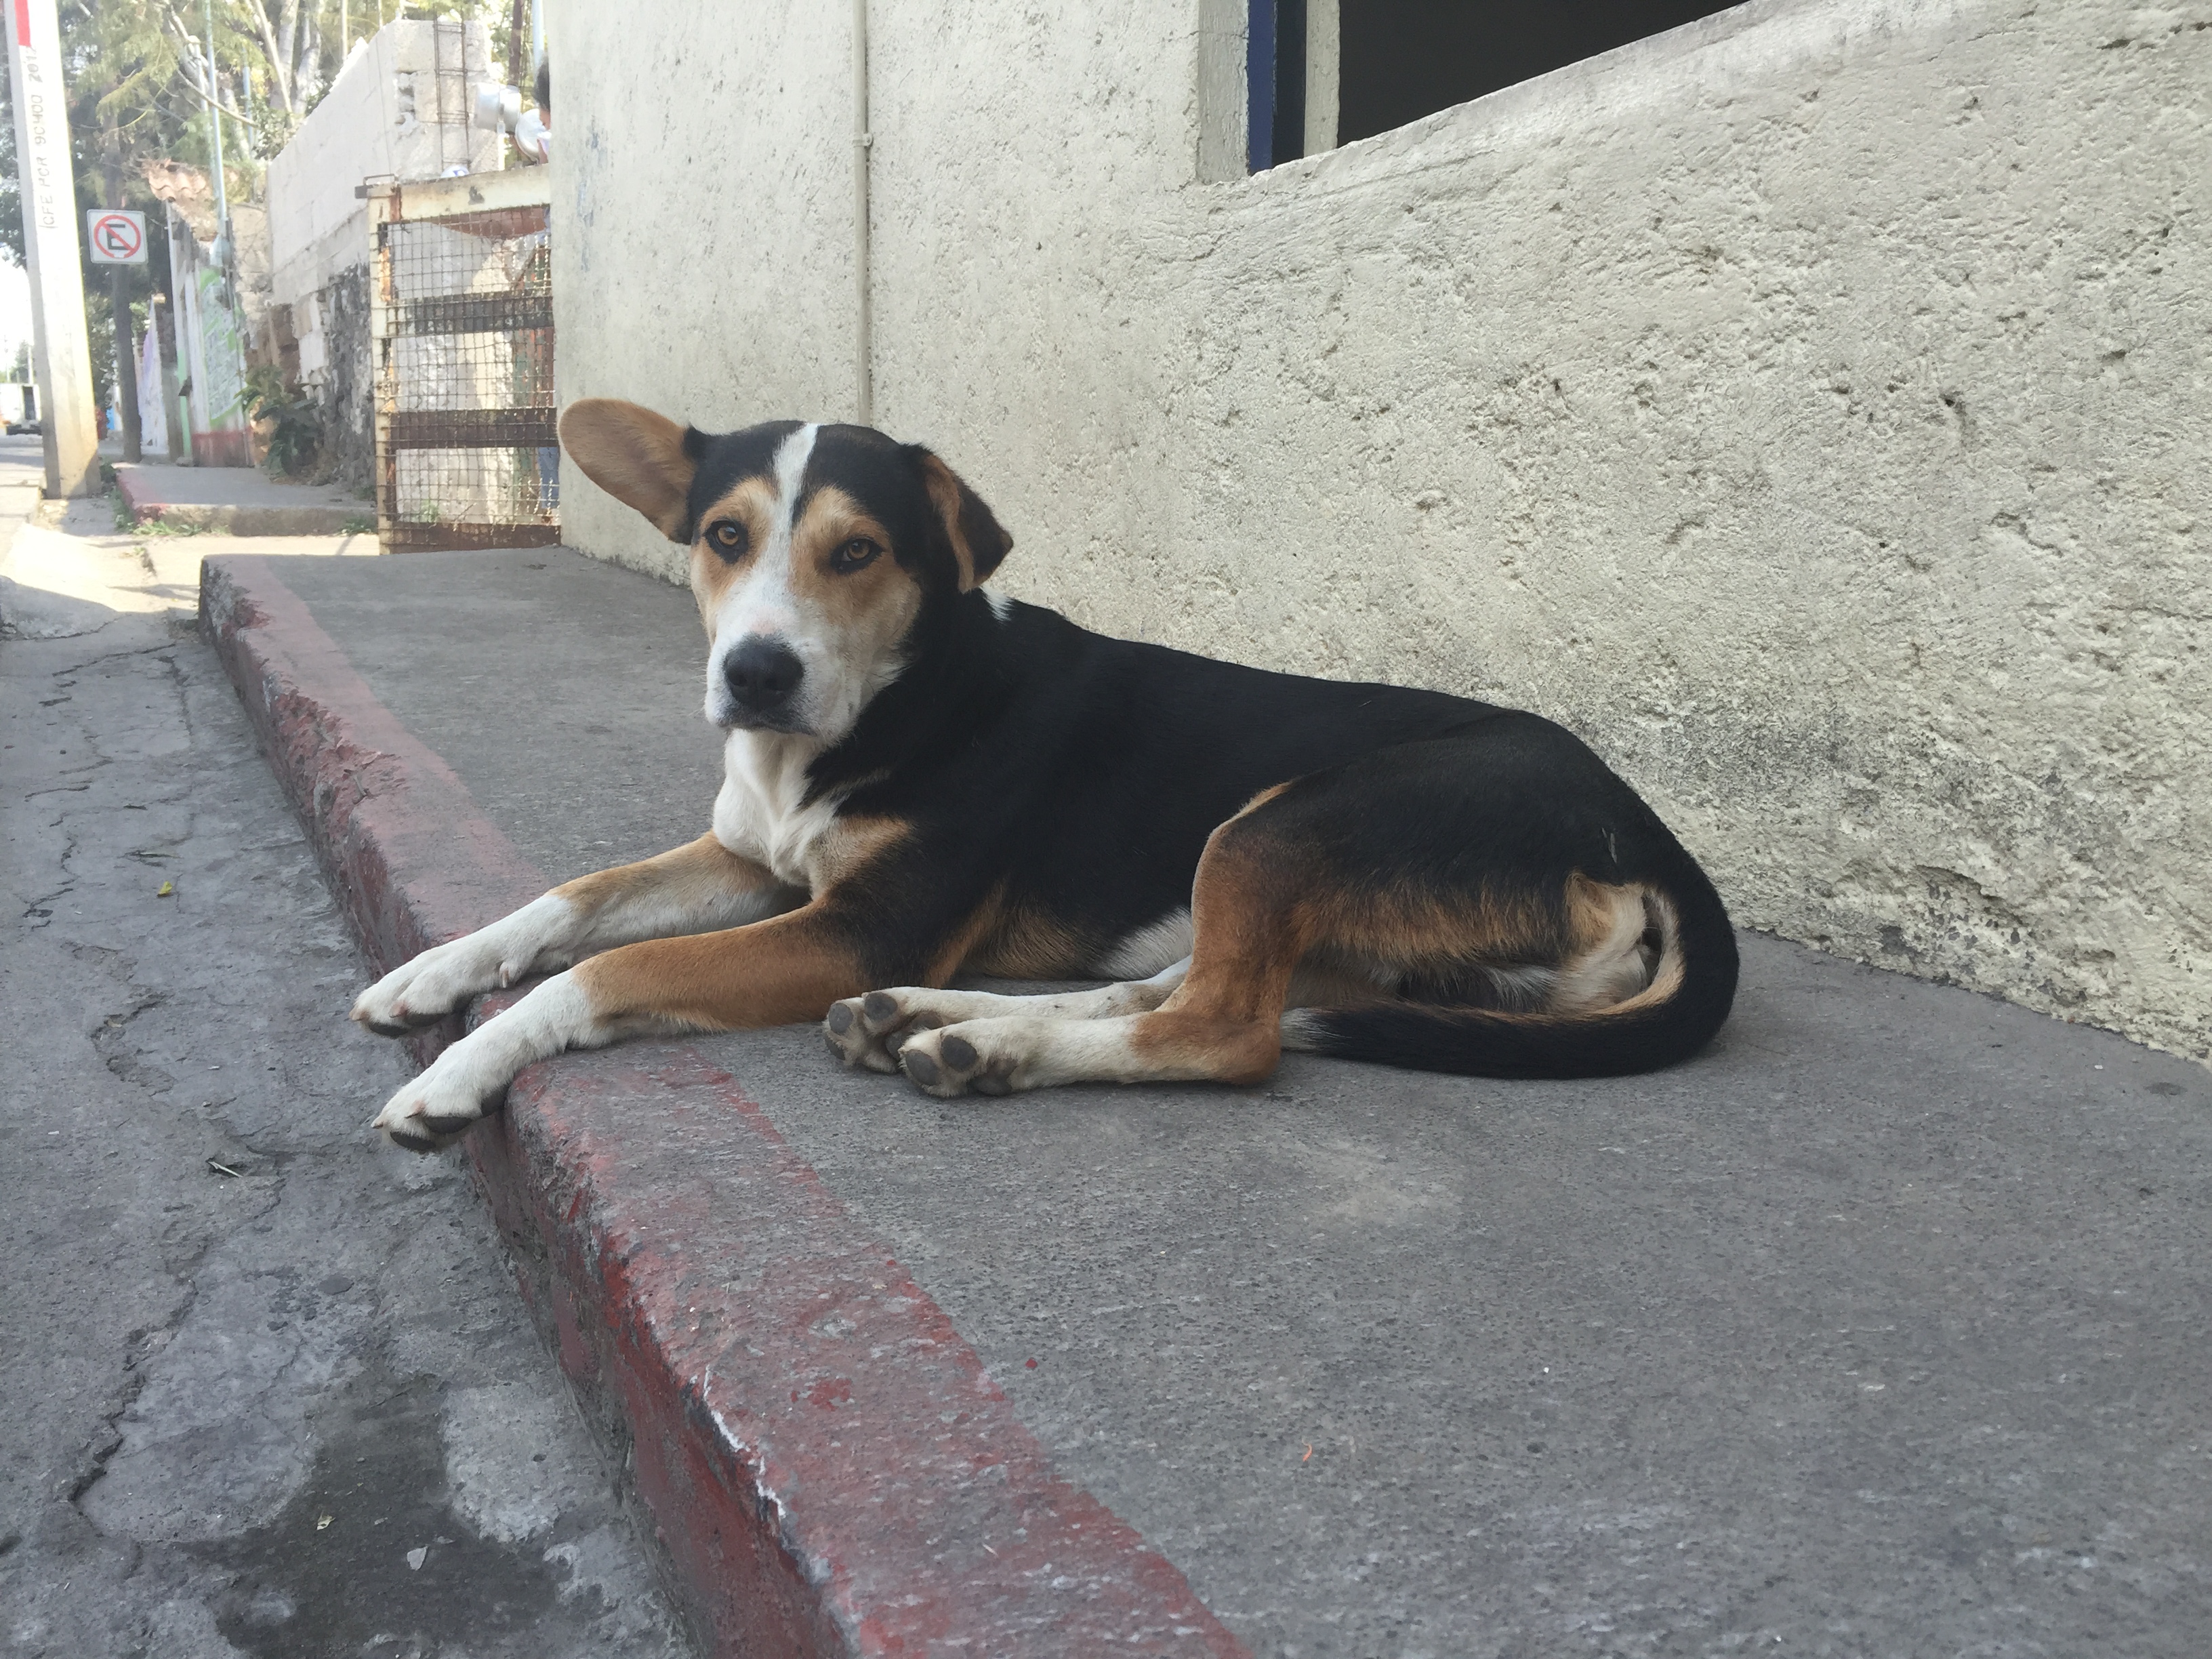 Street Dog in Mexico